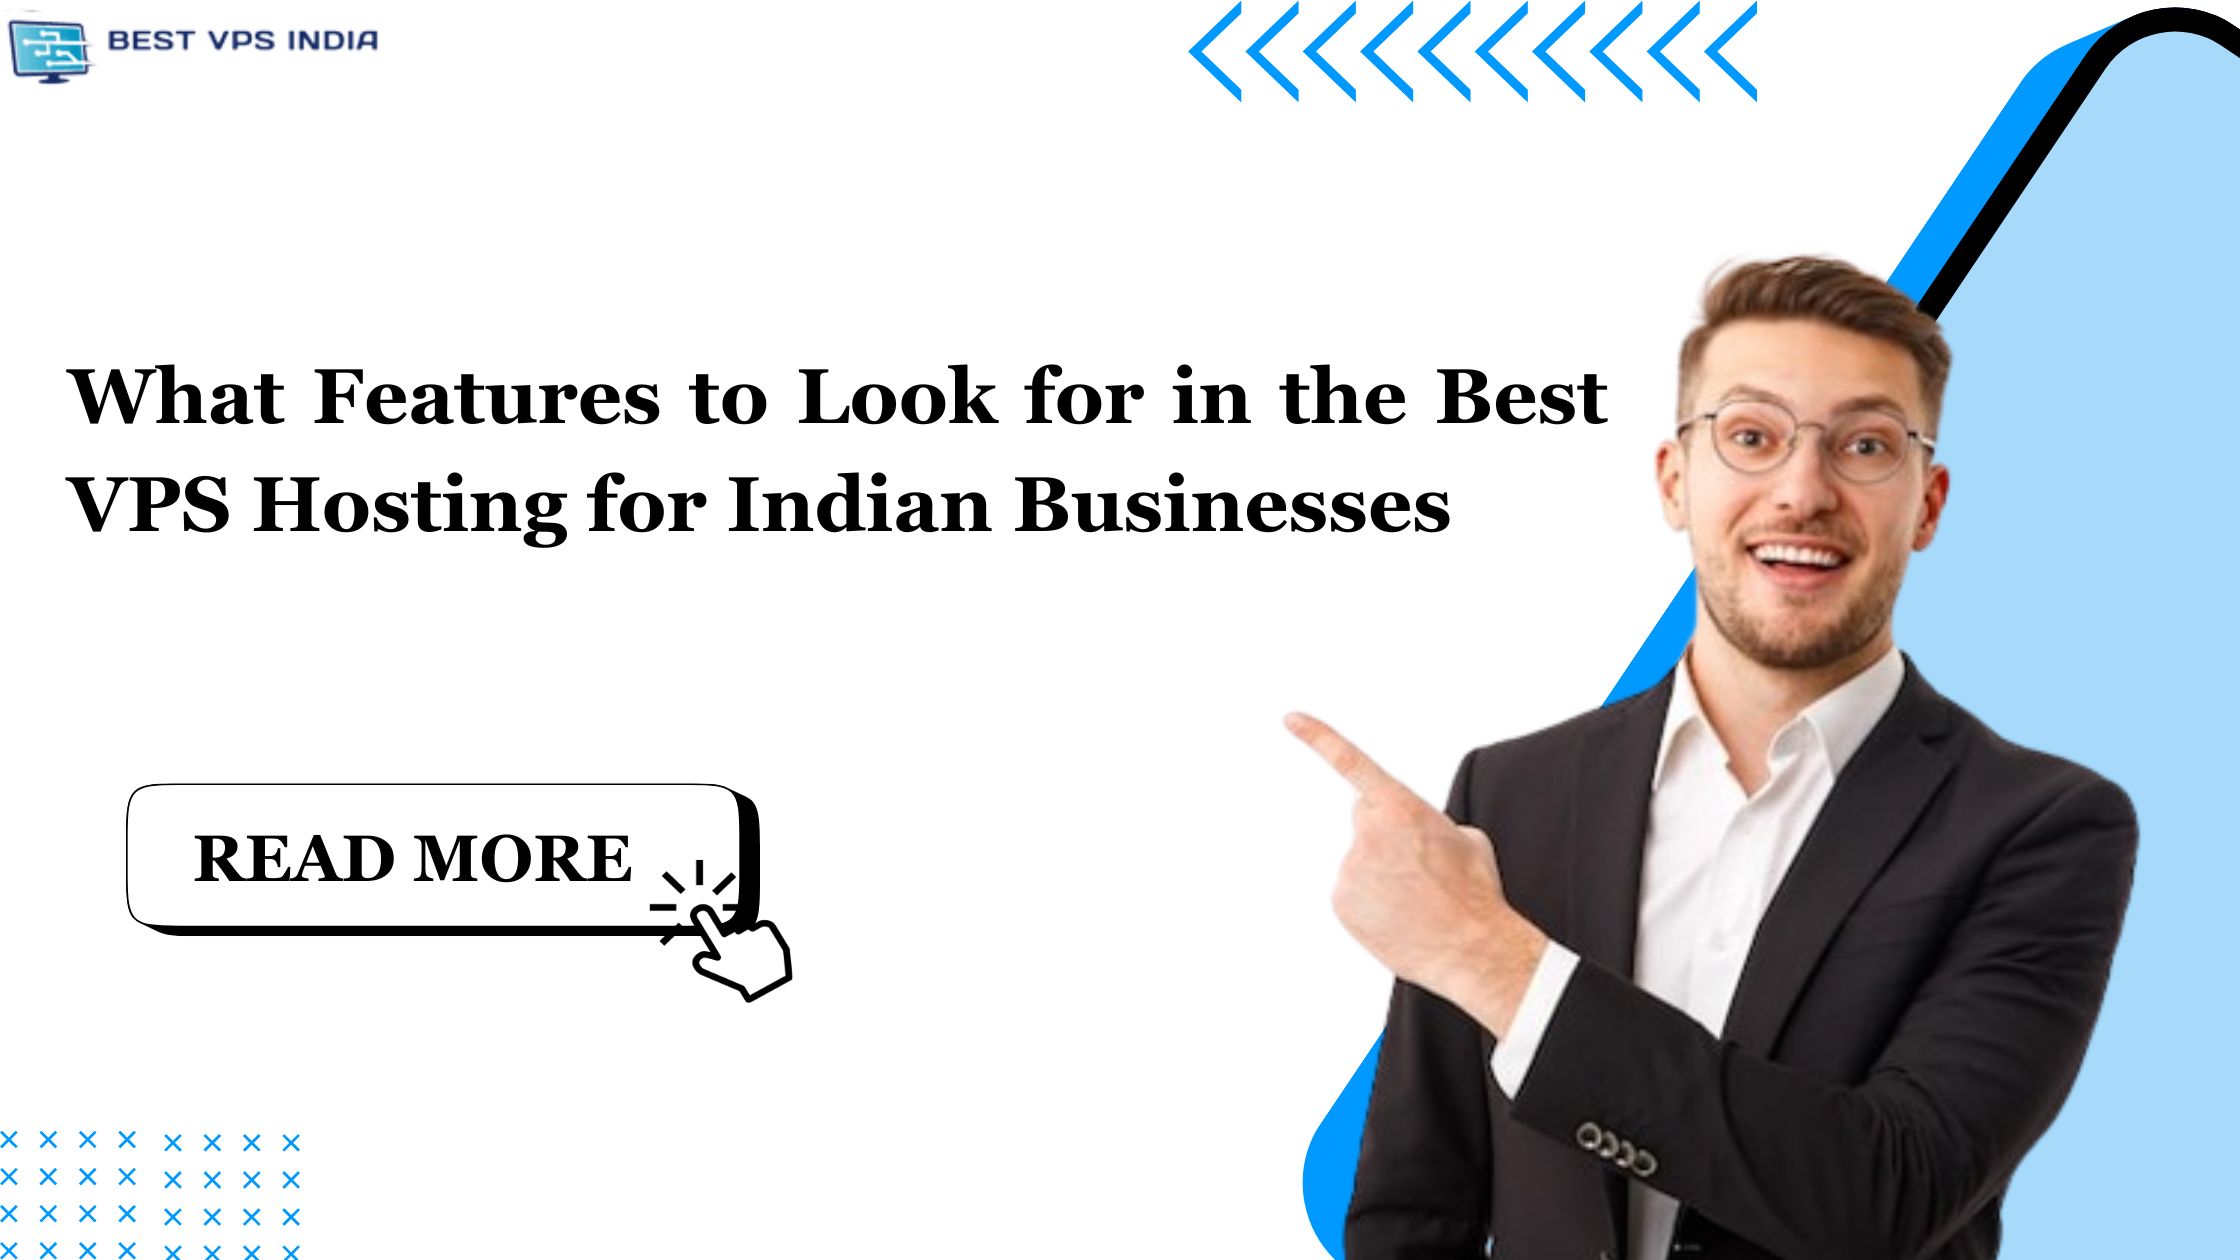 Features to Look for in the Best VPS Hosting for Indian Businesses